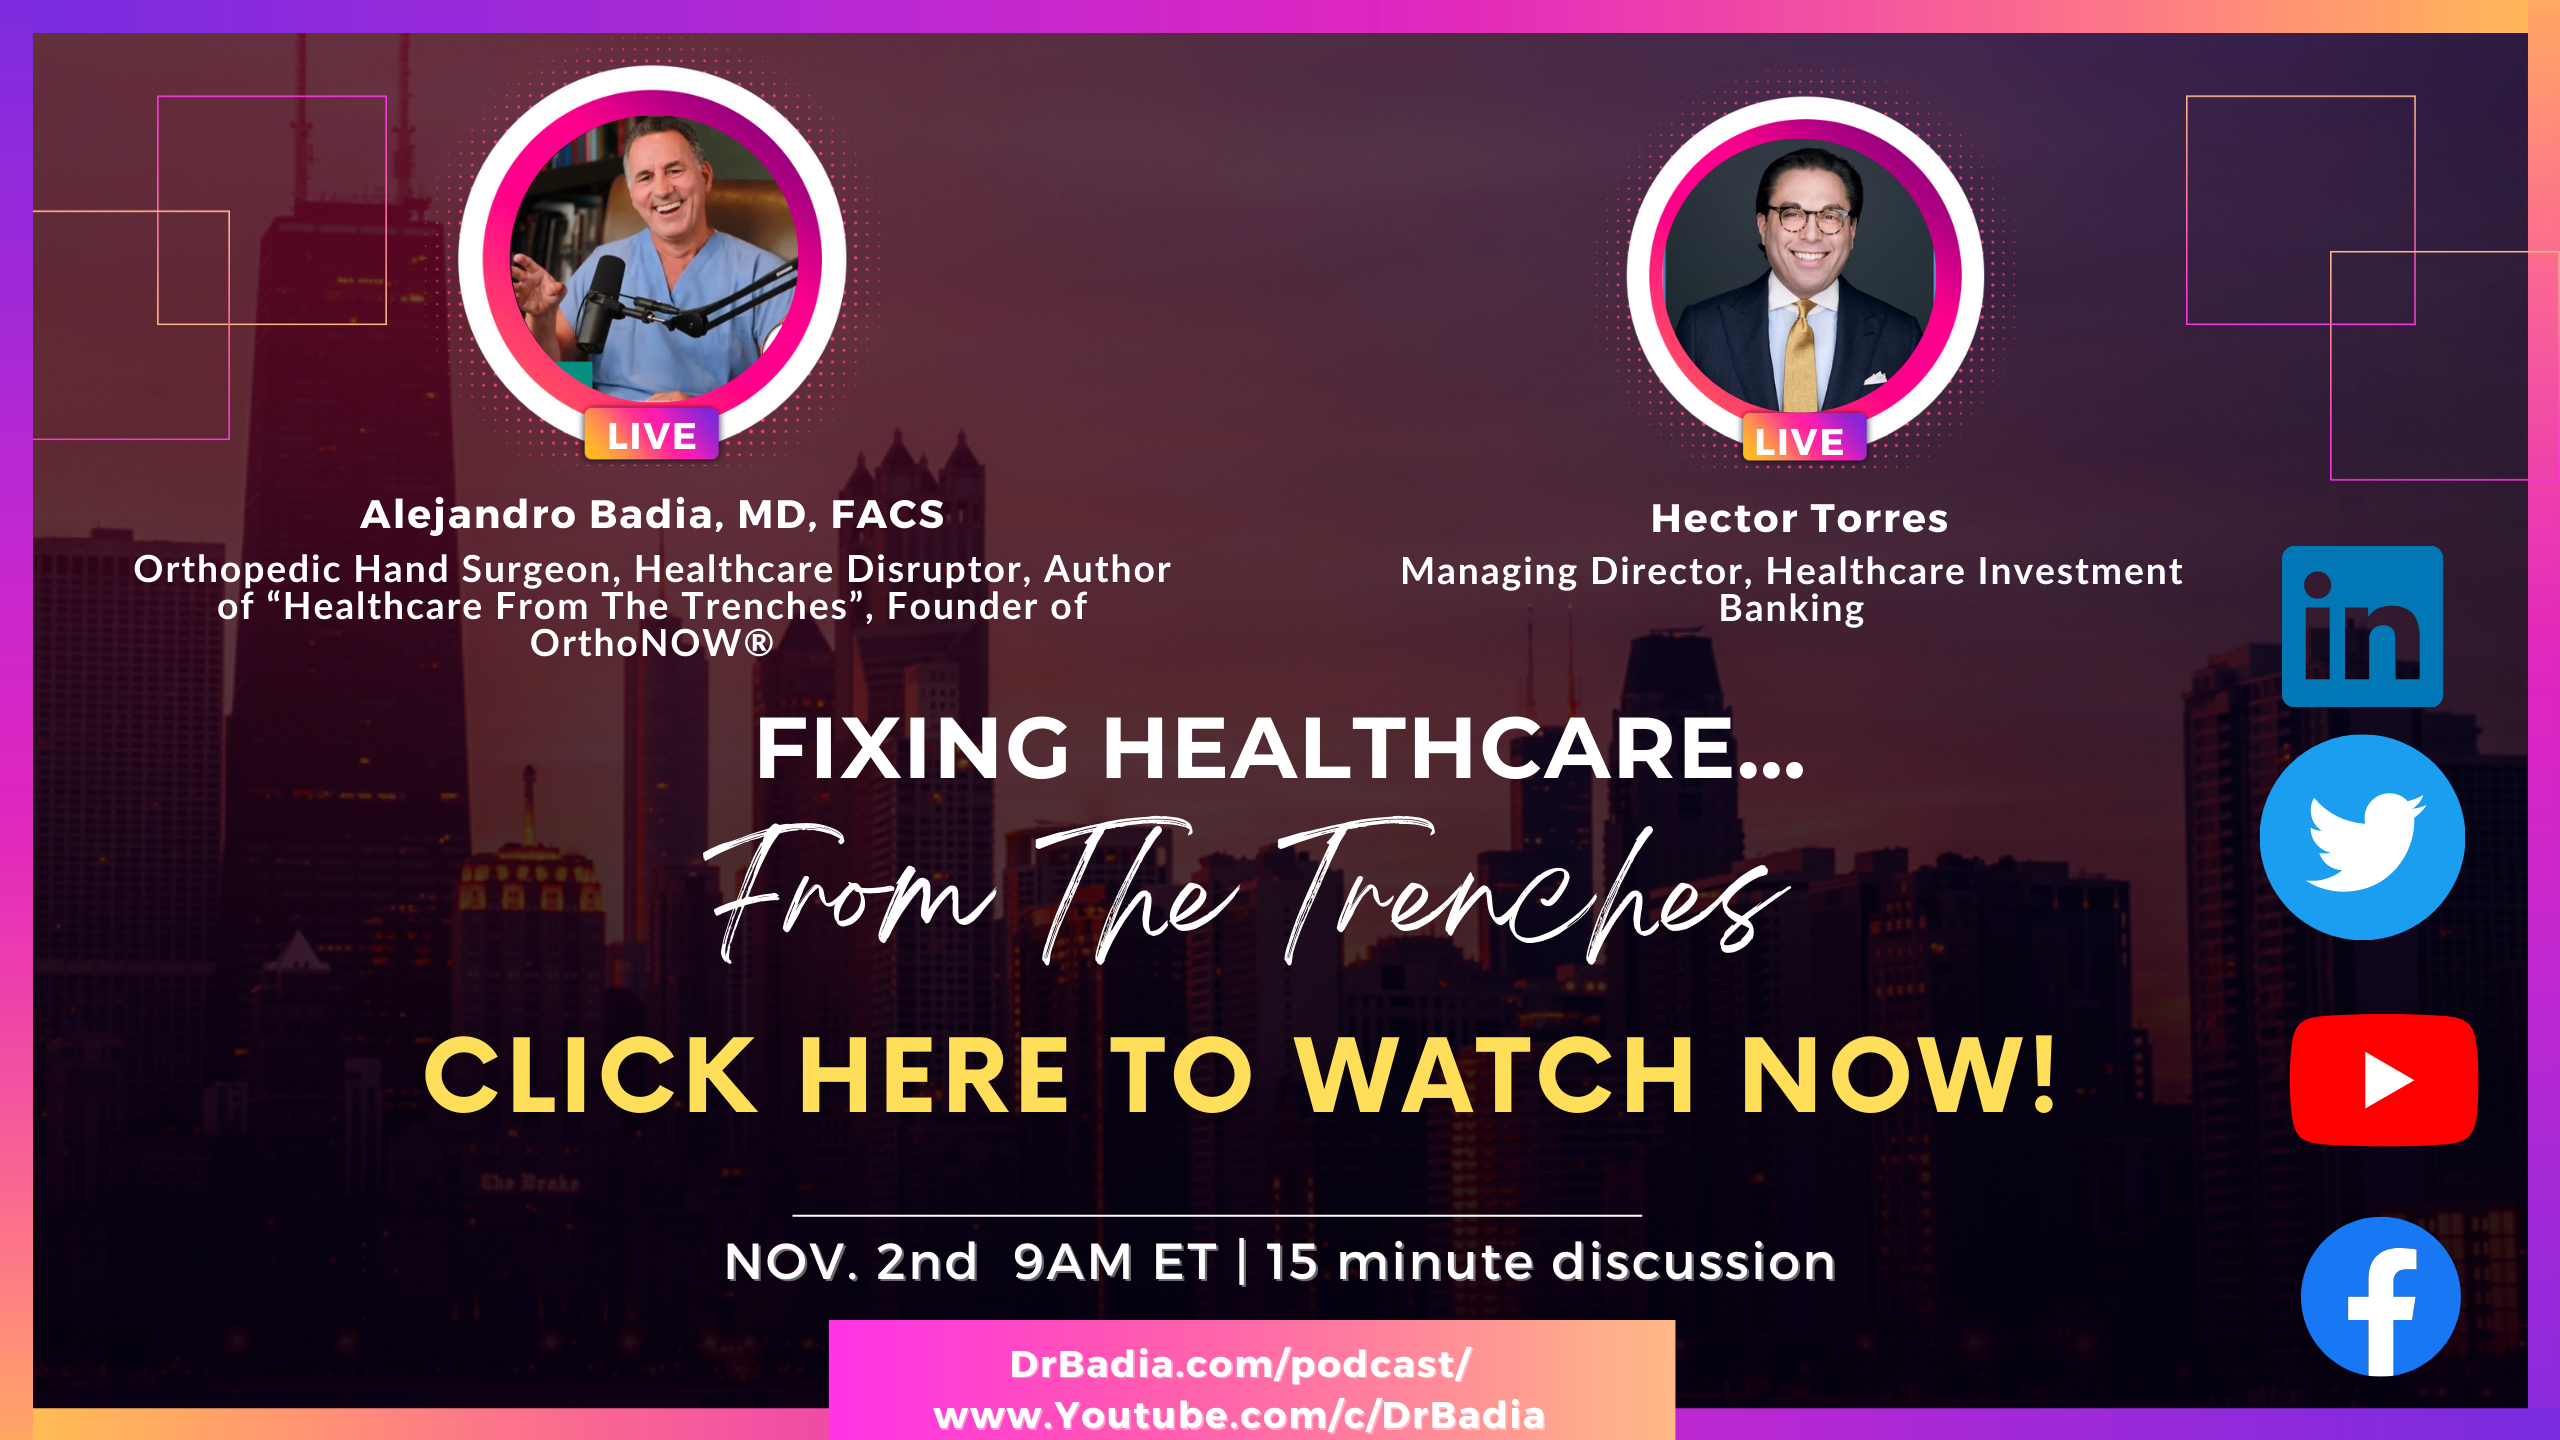 E23 Hector Torres on "Fixing Healthcare...From The Trenches" with Dr. Badia